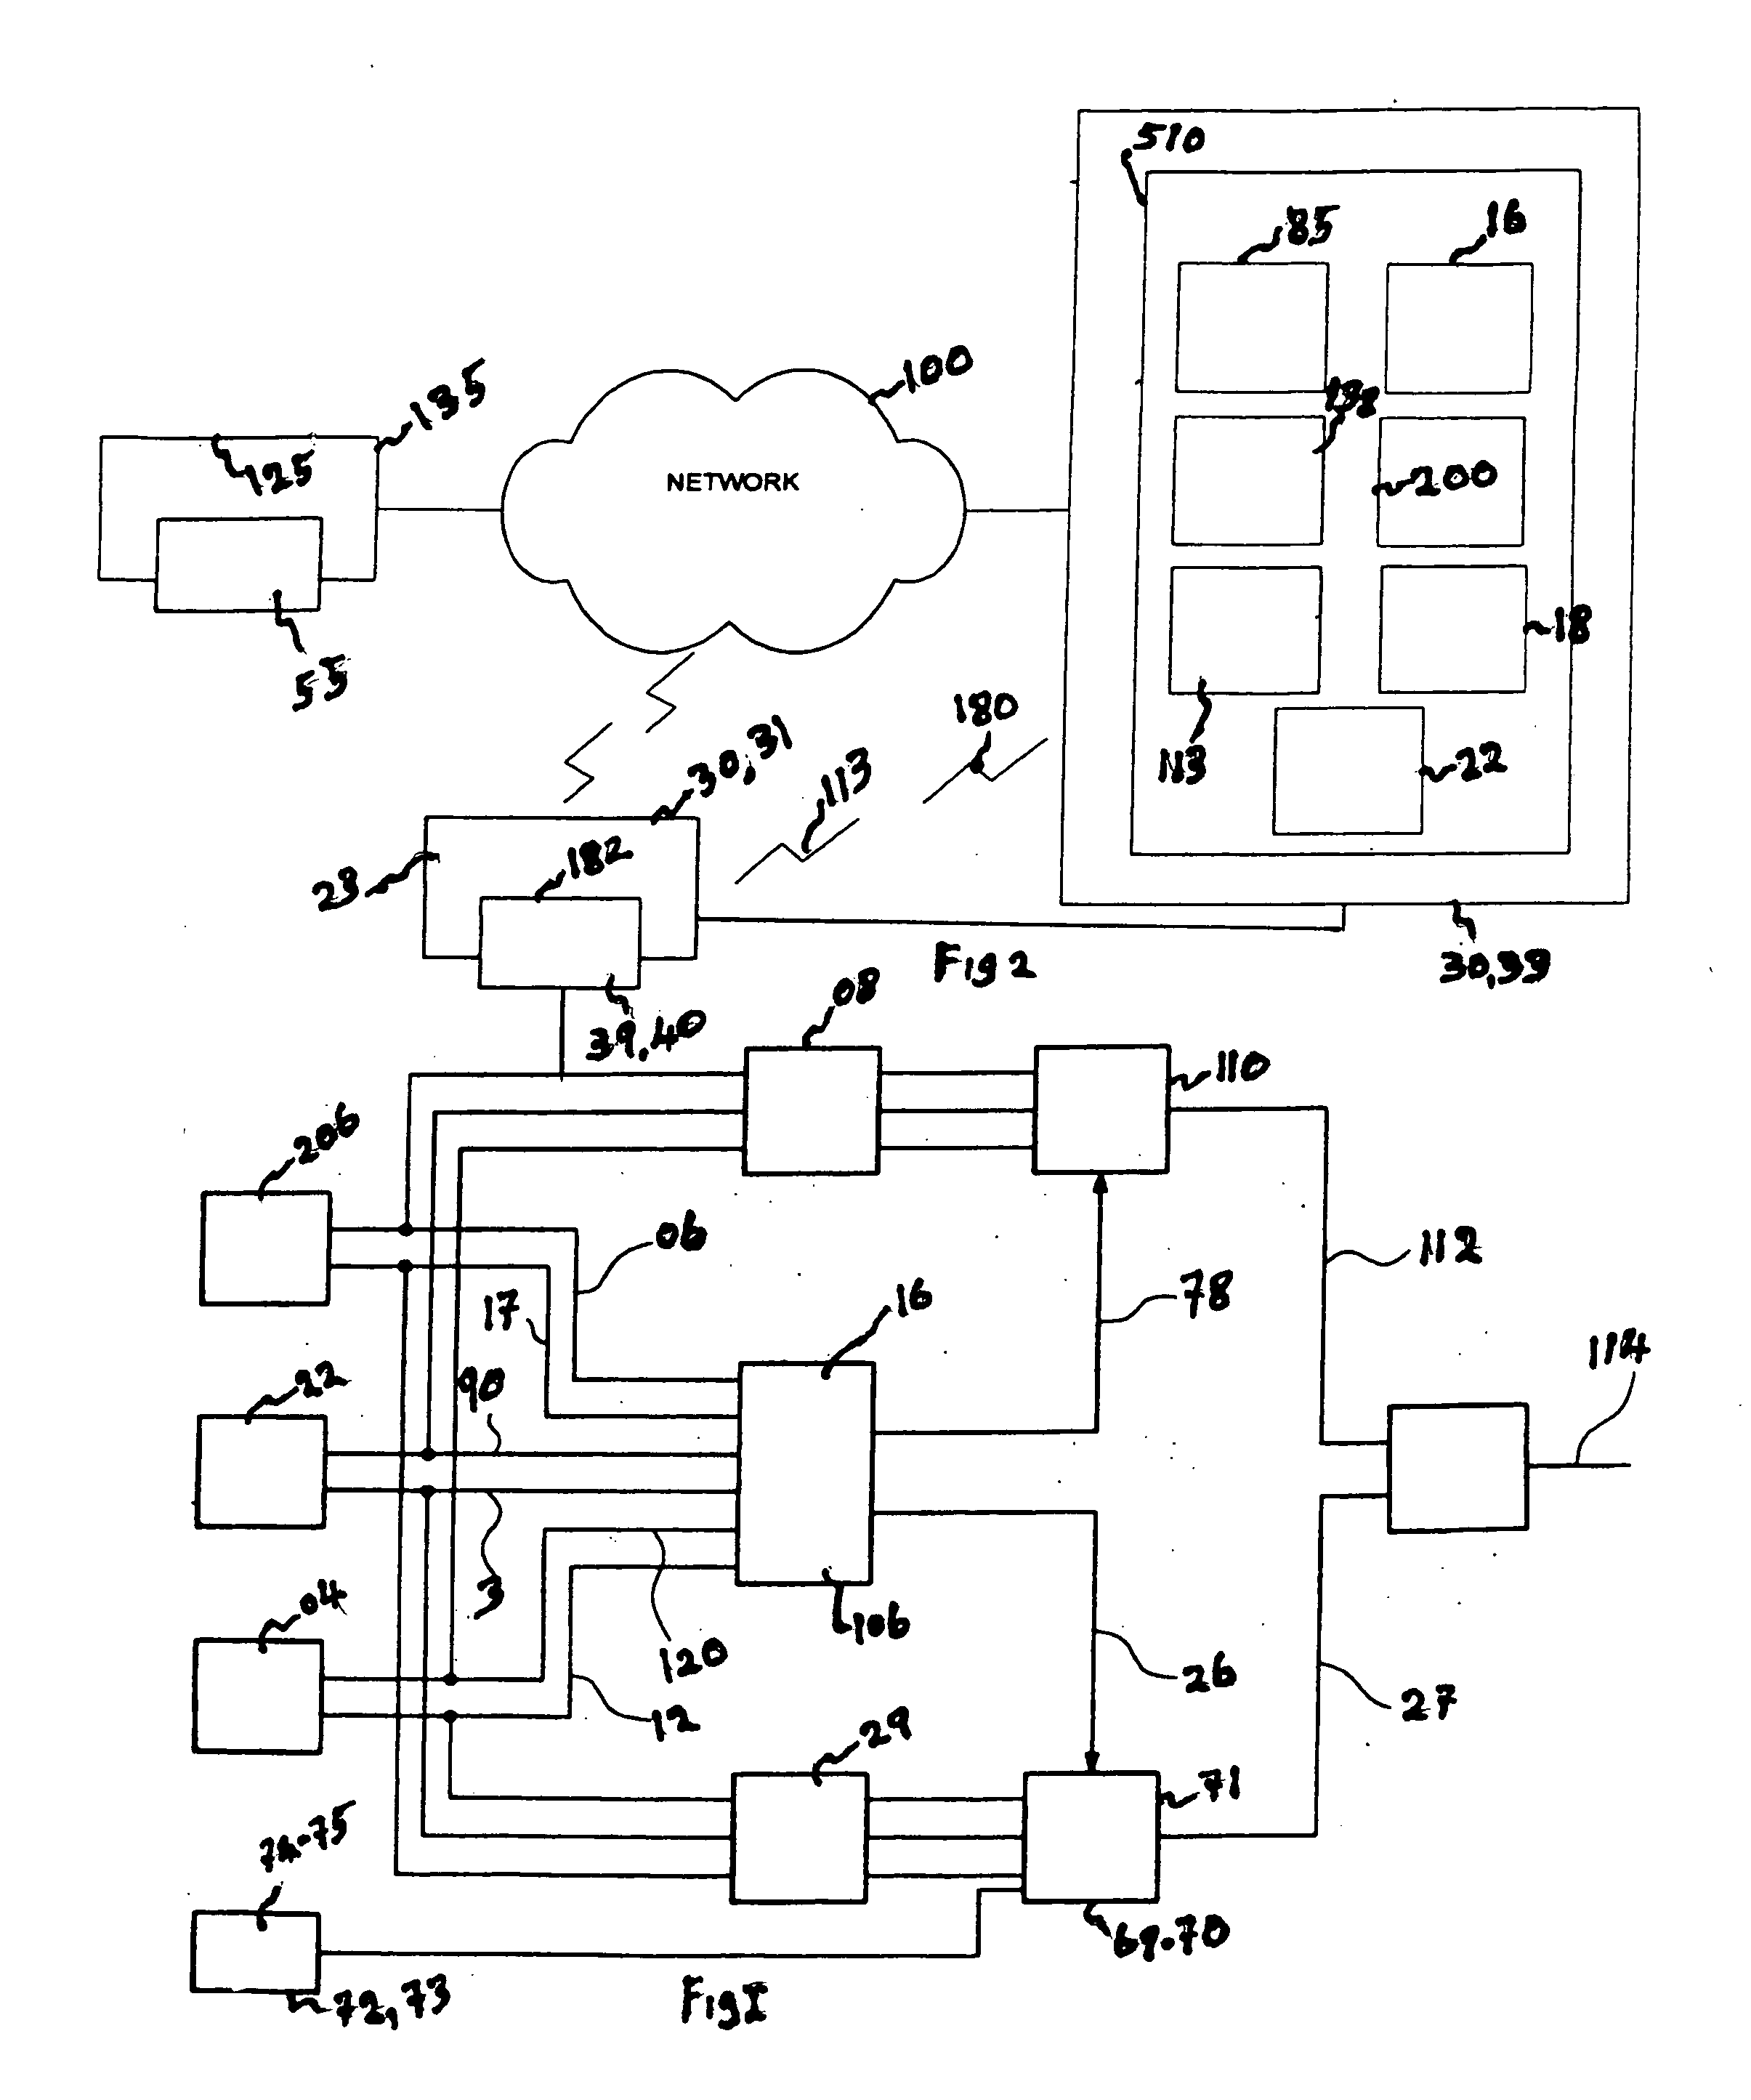 Entertainment device configured for interactive detection and security vigilant monitoring in communication with a control server